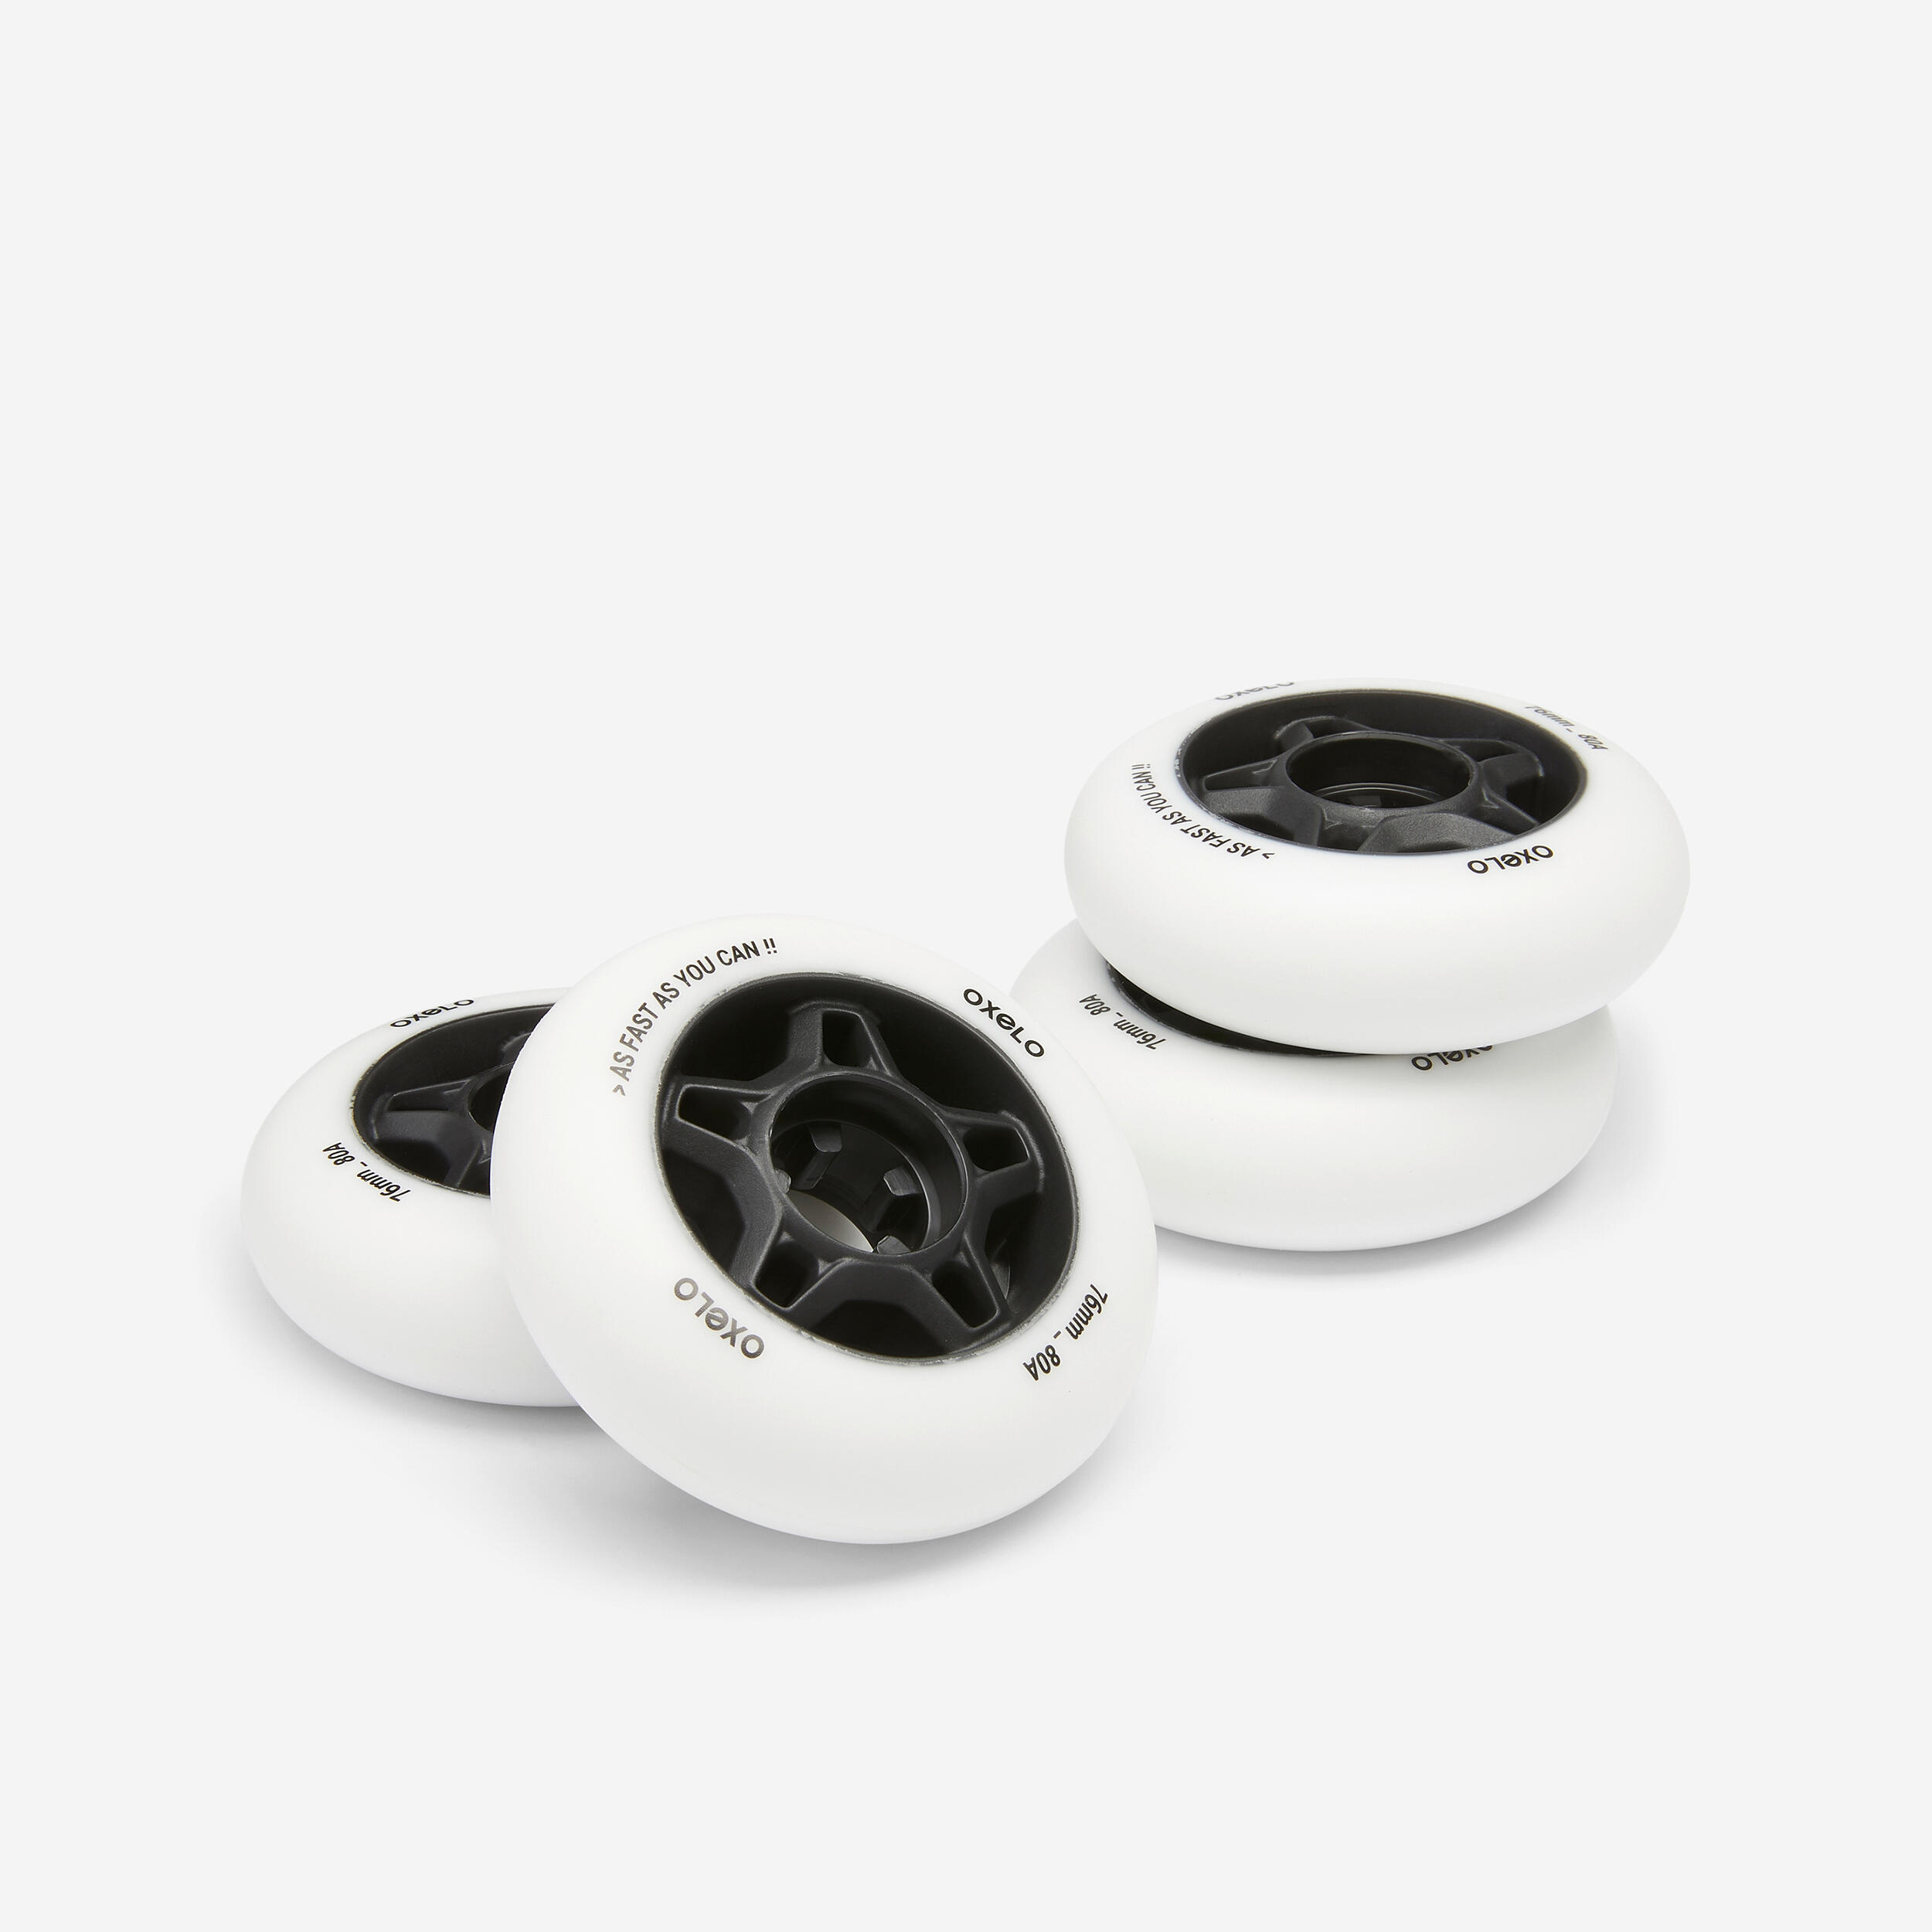 OXELO 76mm 80A Adult Fitness Inline Skating Wheels 4-Pack Fit - White